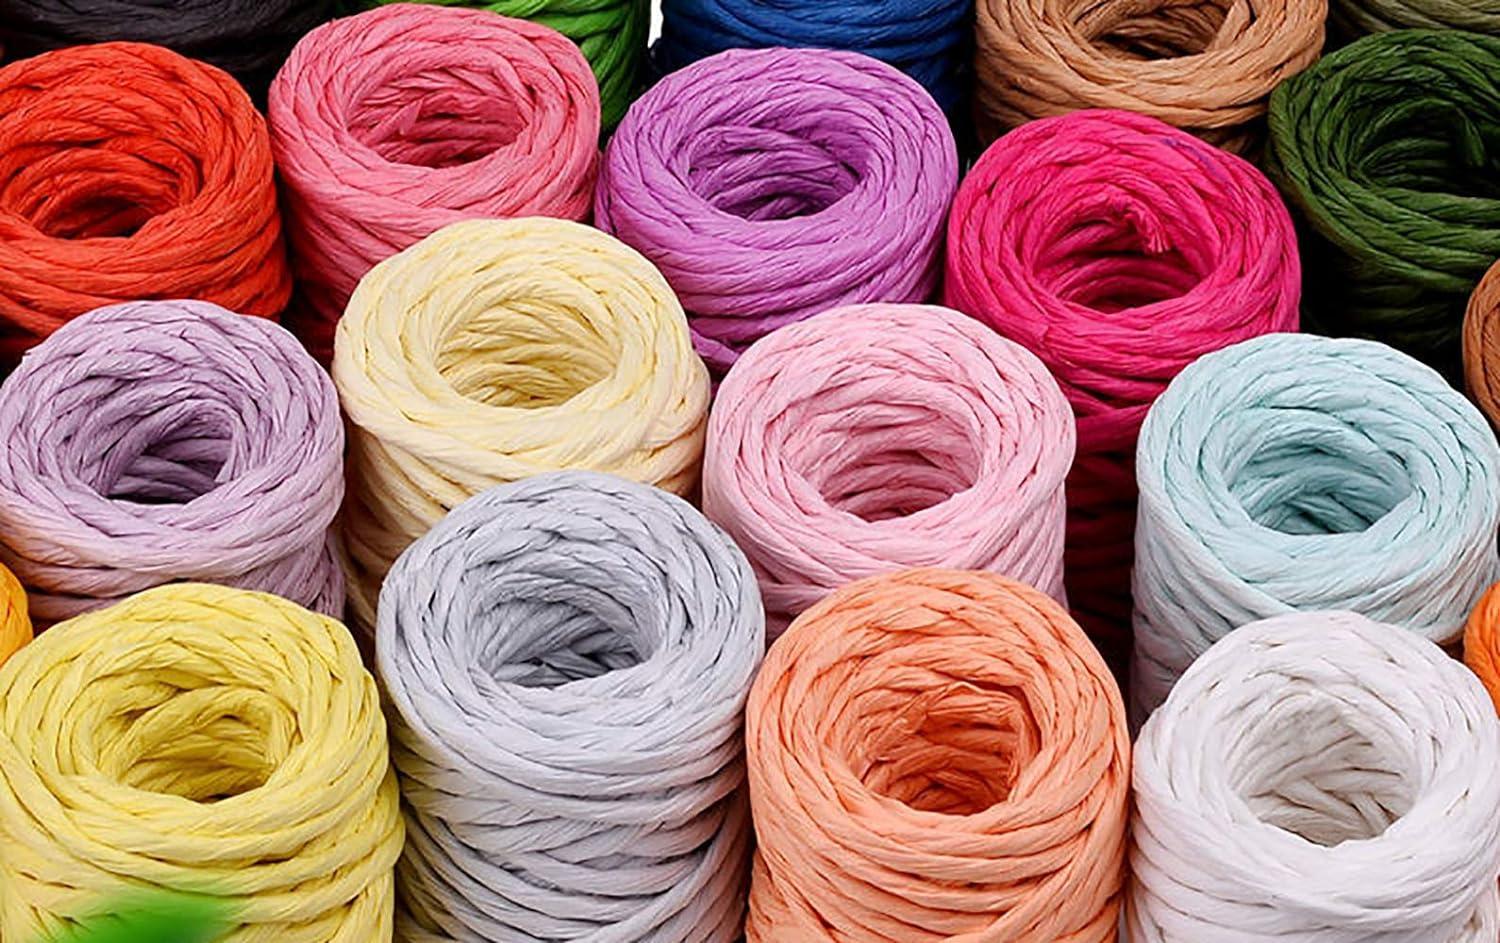 15.31Yard Raffia Stripes Paper String,Colorful Twisted Paper Craft  String/Cord/Rope for Wedding Party Decor Flower Wrapping Rustic Decor DIY  Making